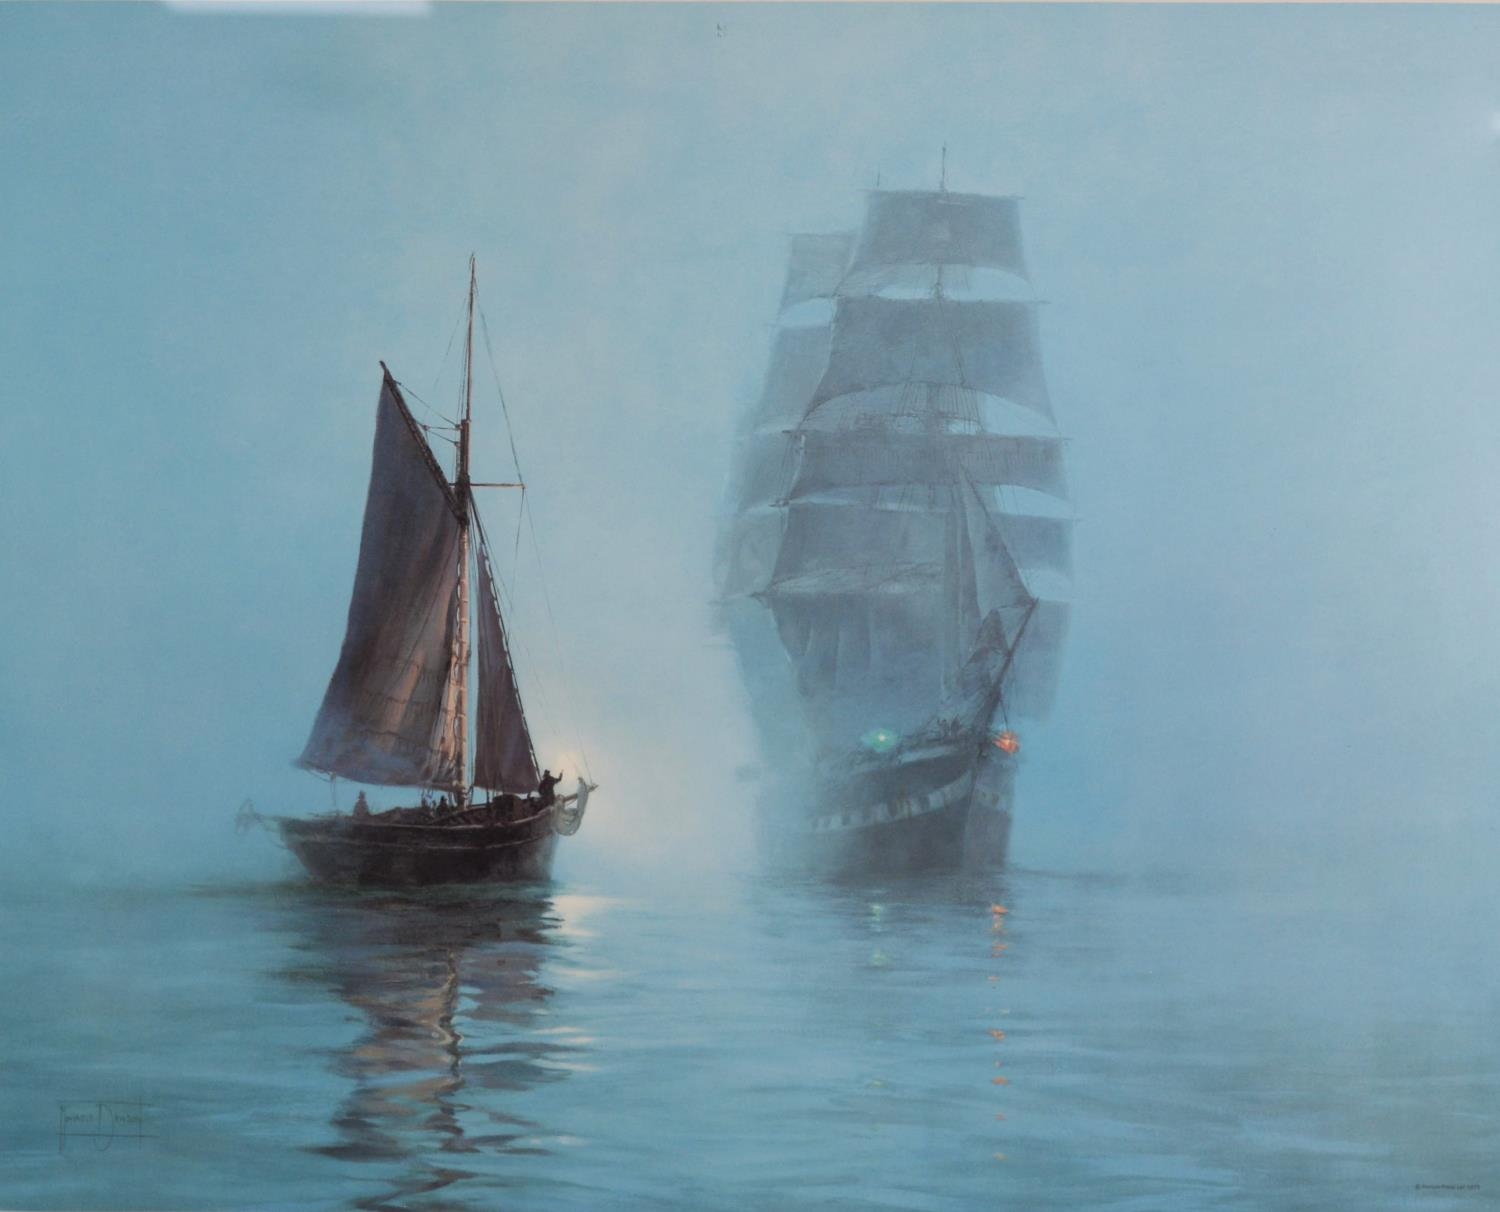 MONTAGUE DAWSON, three artists signed colour prints, seascapes with sailing vessels, signed in - Image 6 of 6